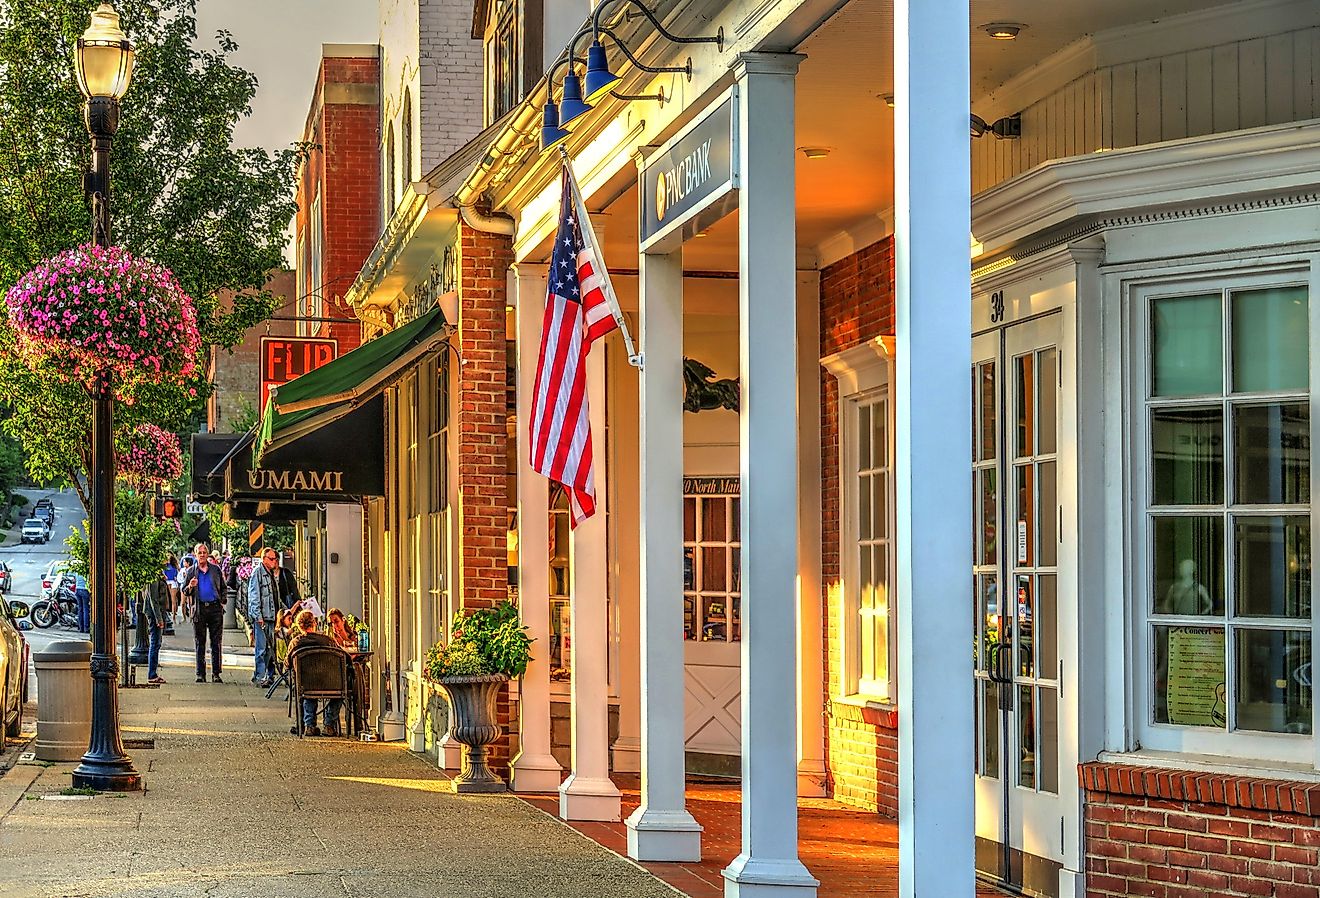 PNC Bank and People Dining on Main Street in July, in Chagrin Falls, Ohio. Image credit Lynne Neuman via Shutterstock